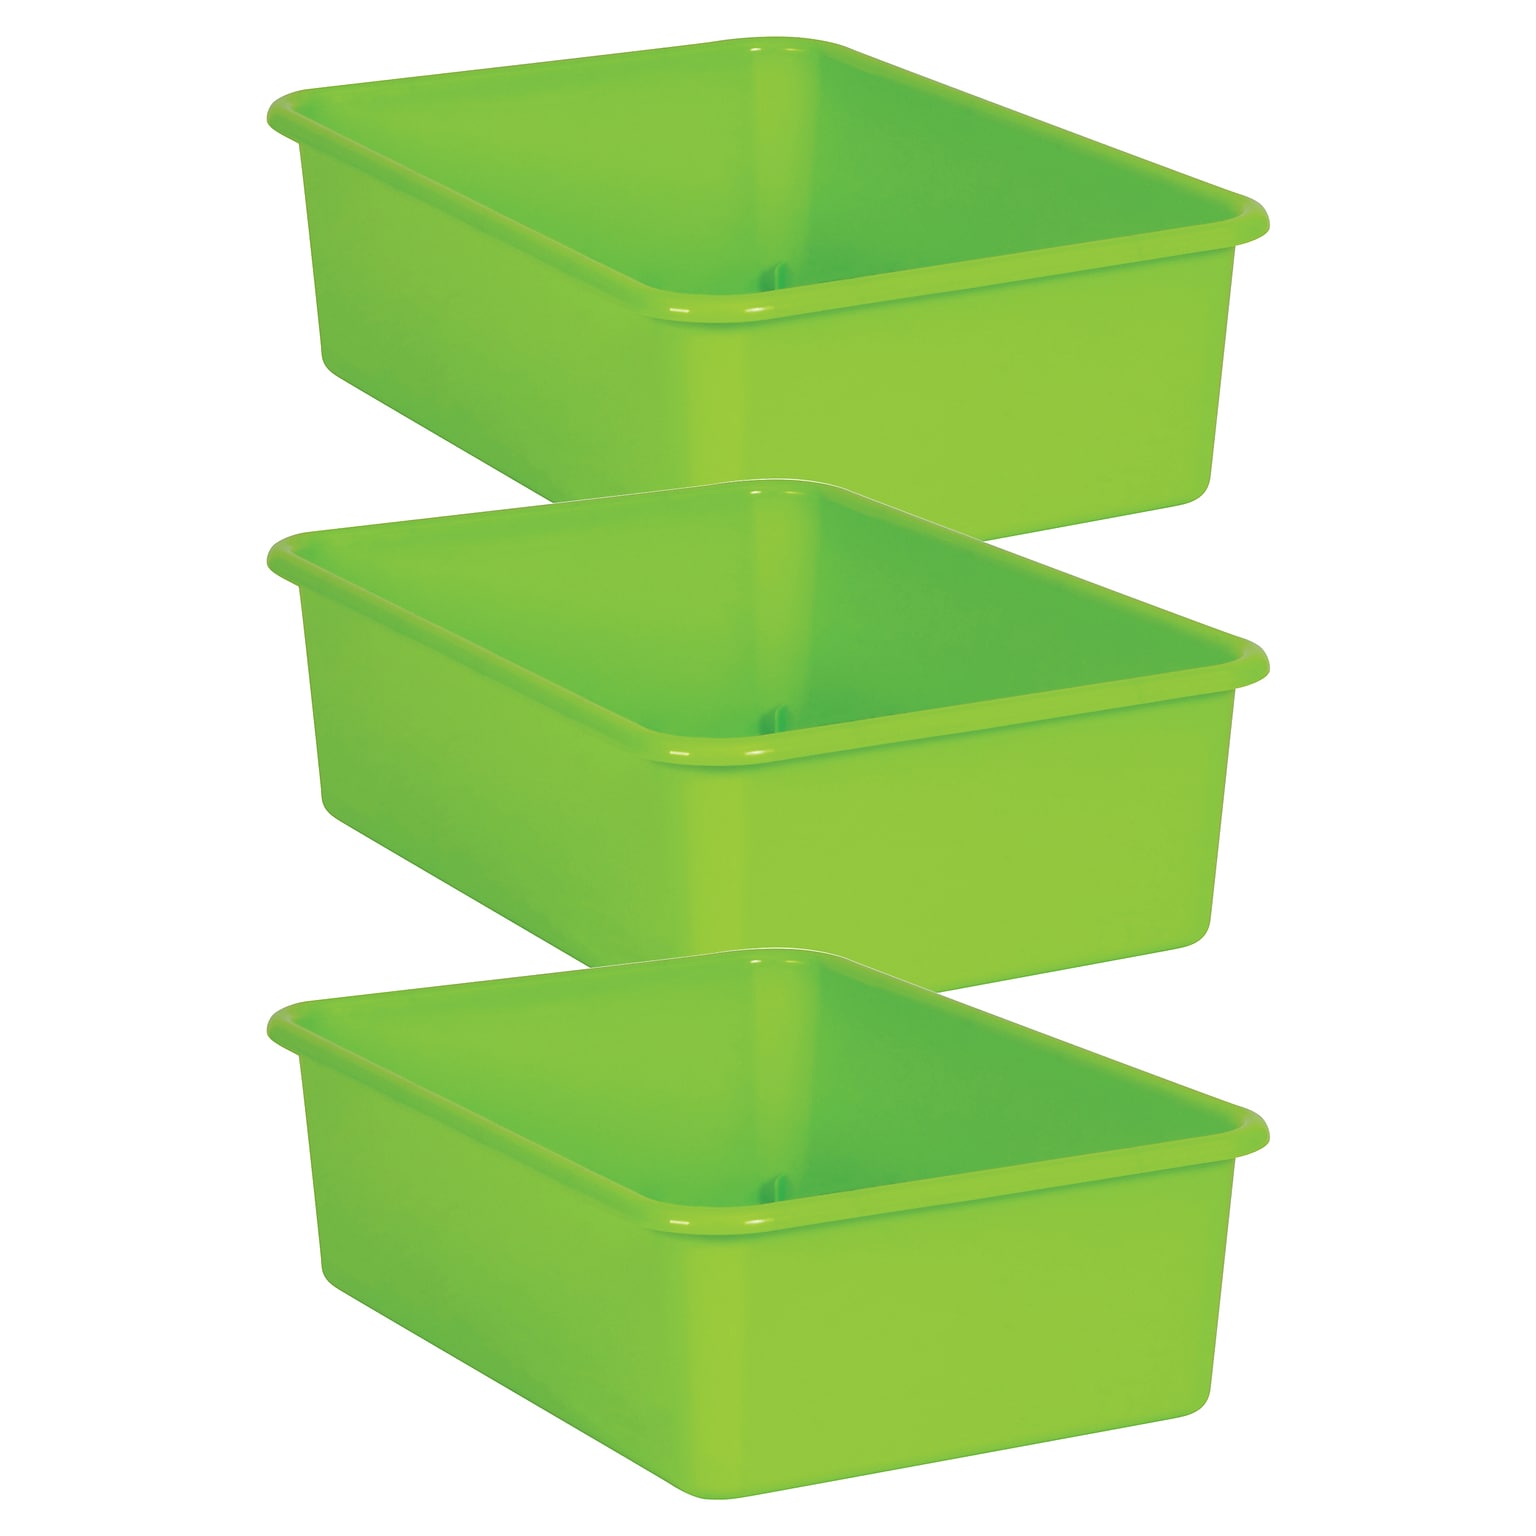 Teacher Created Resources® Plastic Storage Bin, Large, 16.25 x 11.5 x 5, Lime, Pack of 3 (TCR20409-3)